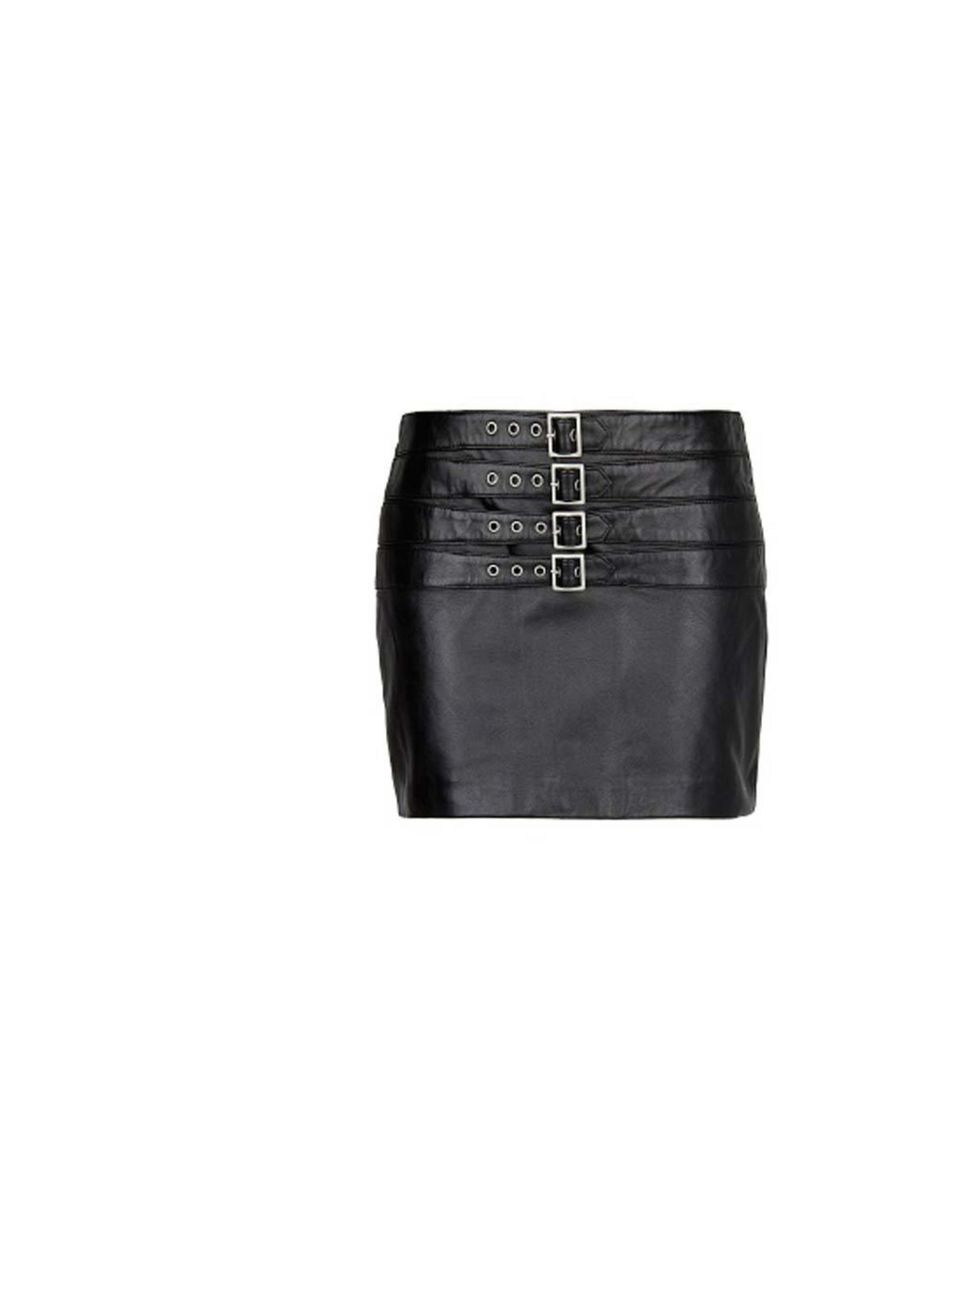 <p>Add grunge appeal with a black leather skirt.</p><p>This one with buckles is from <a href="http://shop.mango.com/GB/p0/mango/clothing/buckle-leather-miniskirt/?id=13085577_02&amp;n=1&amp;s=prendas.faldas&amp;ie=0&amp;m=&amp;ts=1378727550525">Mango</a>,